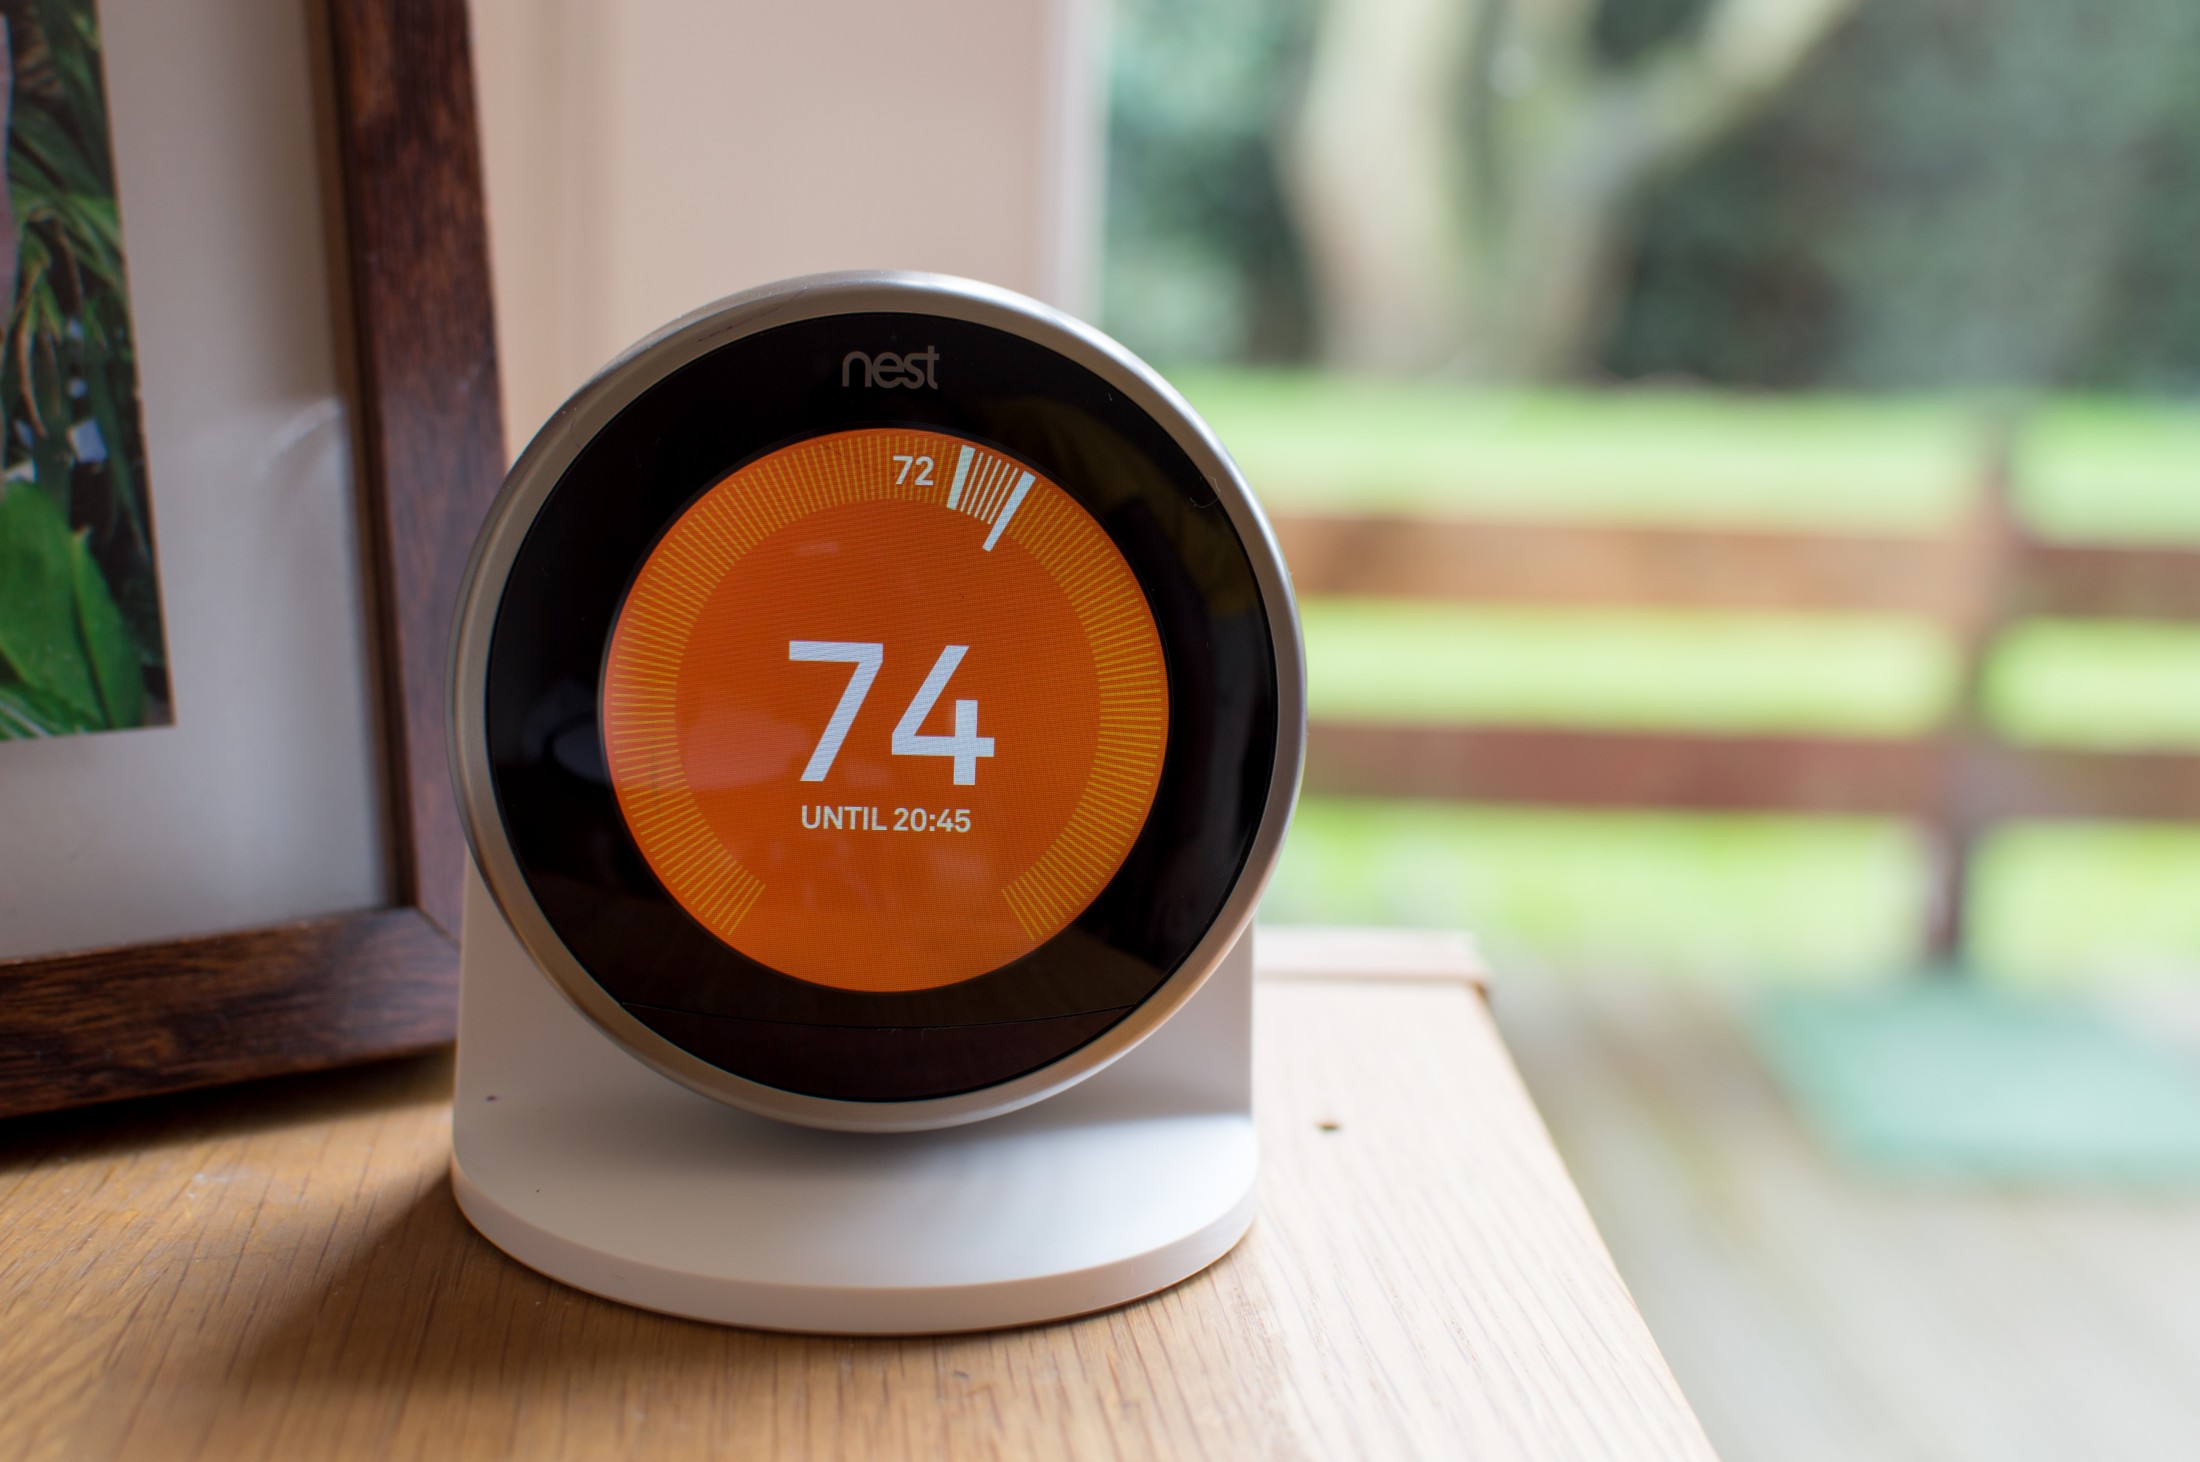 Will Nest thermostat work with my Ductless or HVAC System?